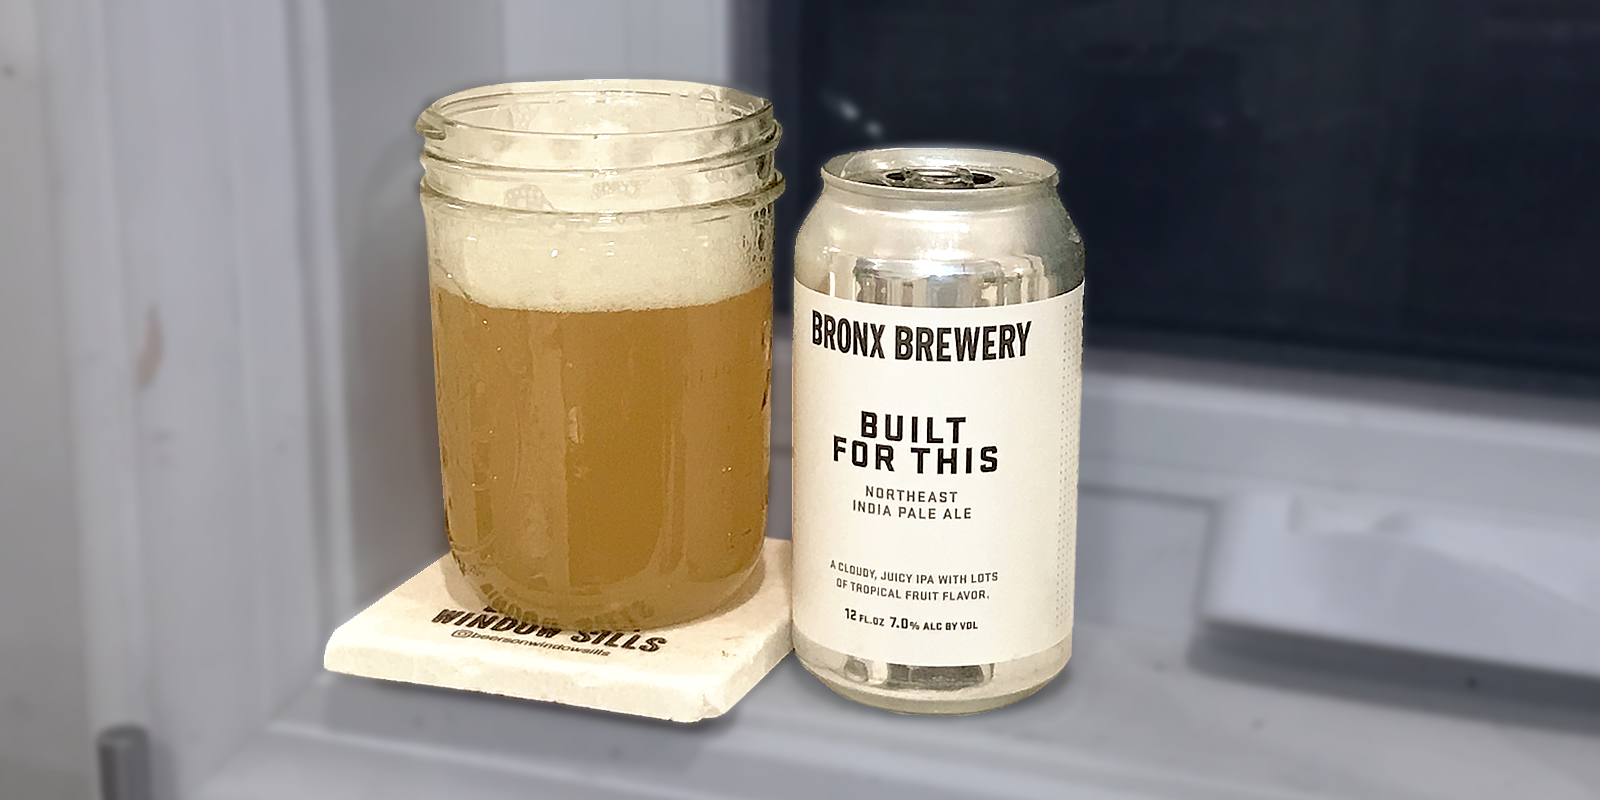 A Can of The Bronx Brewery Built For This